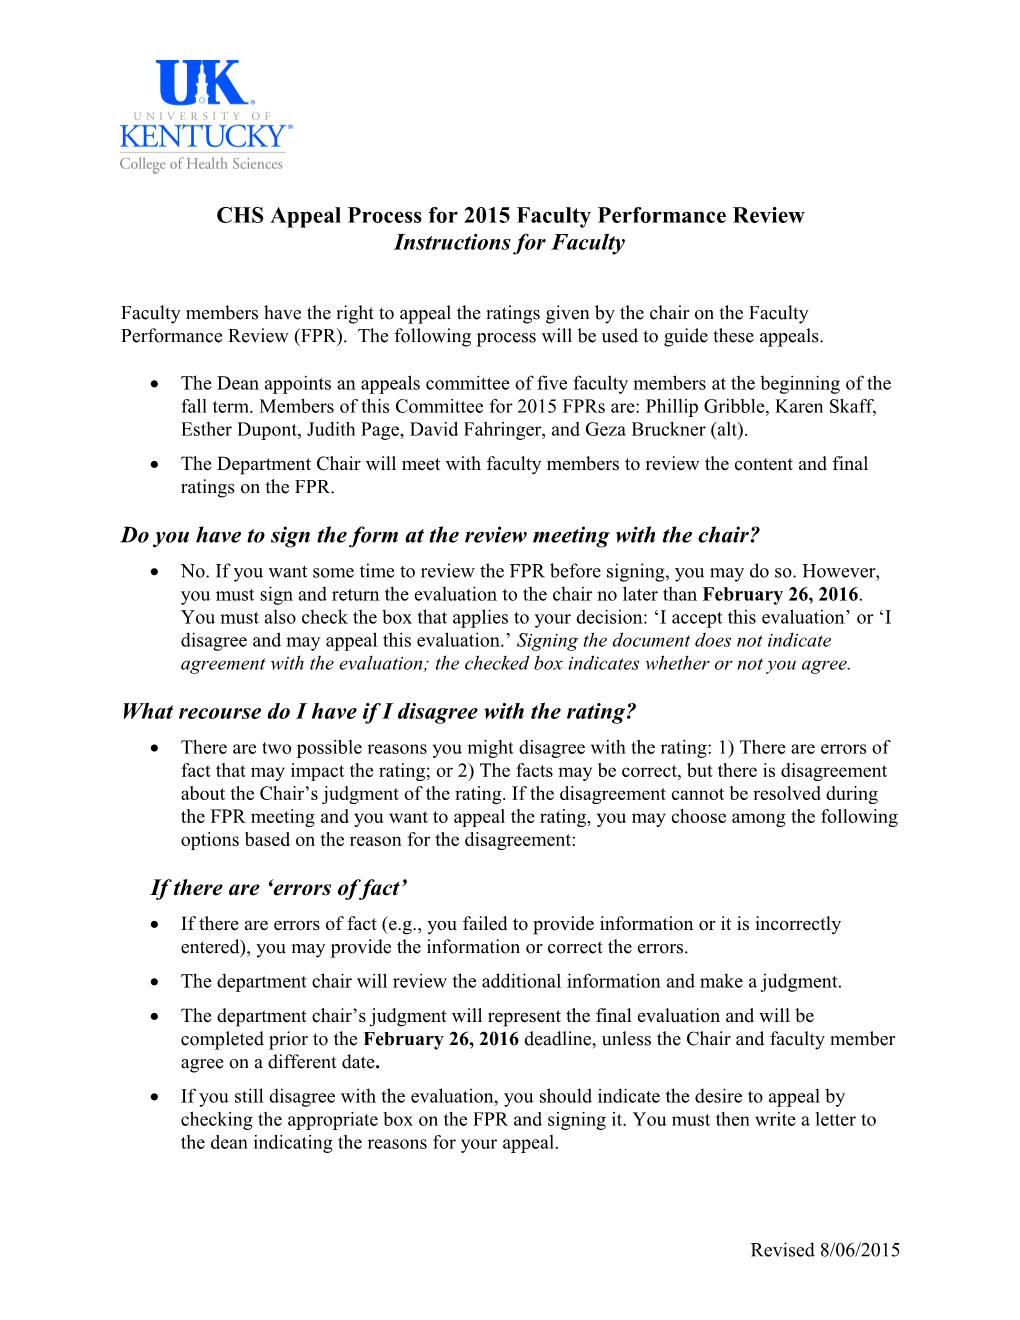 Appeal Process for Annual Performance Review